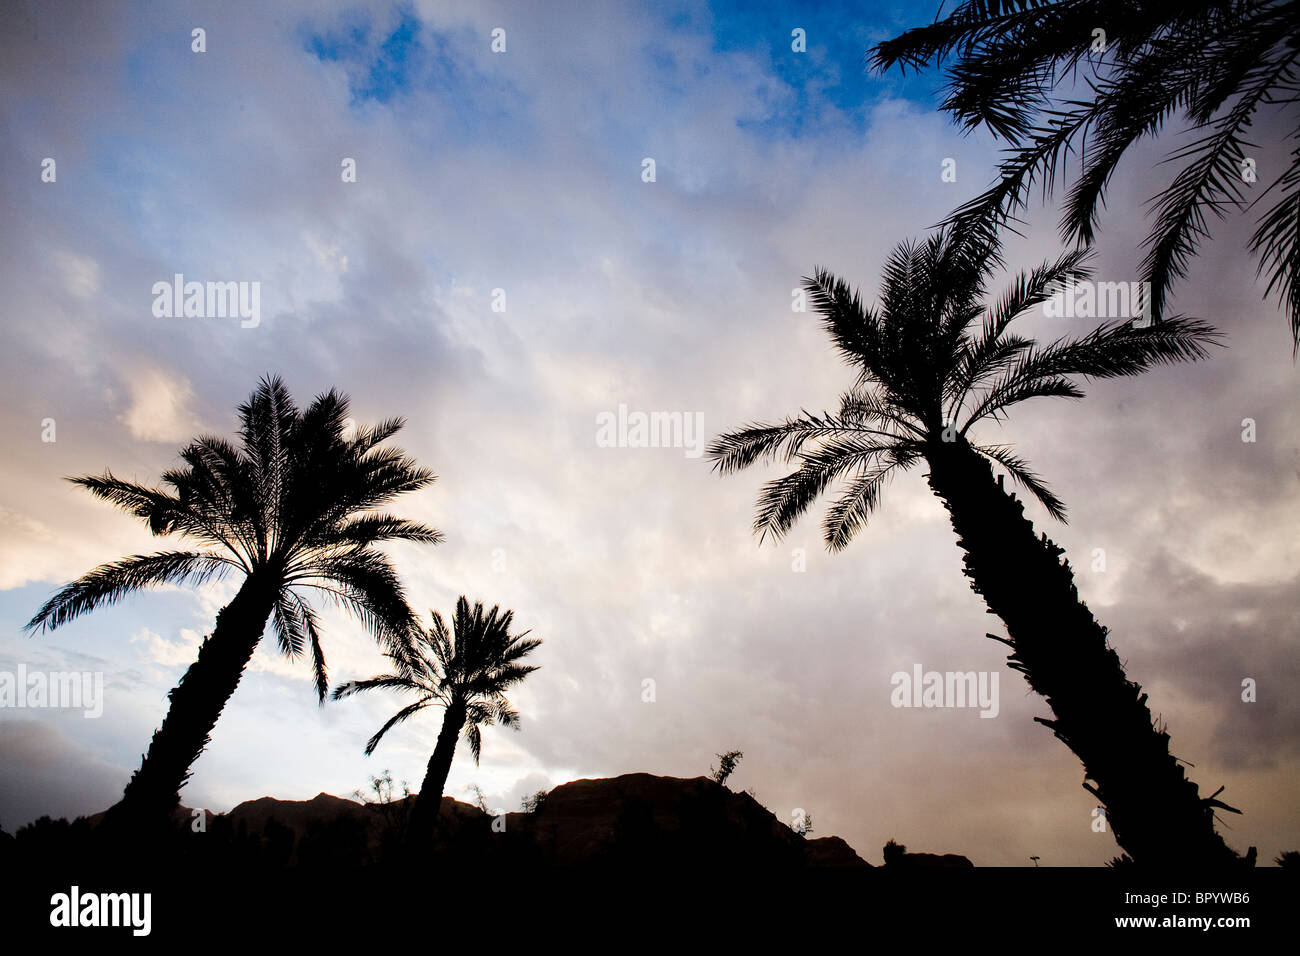 Photograph of the twilight skies over the palm trees in the Judean Desert Stock Photo